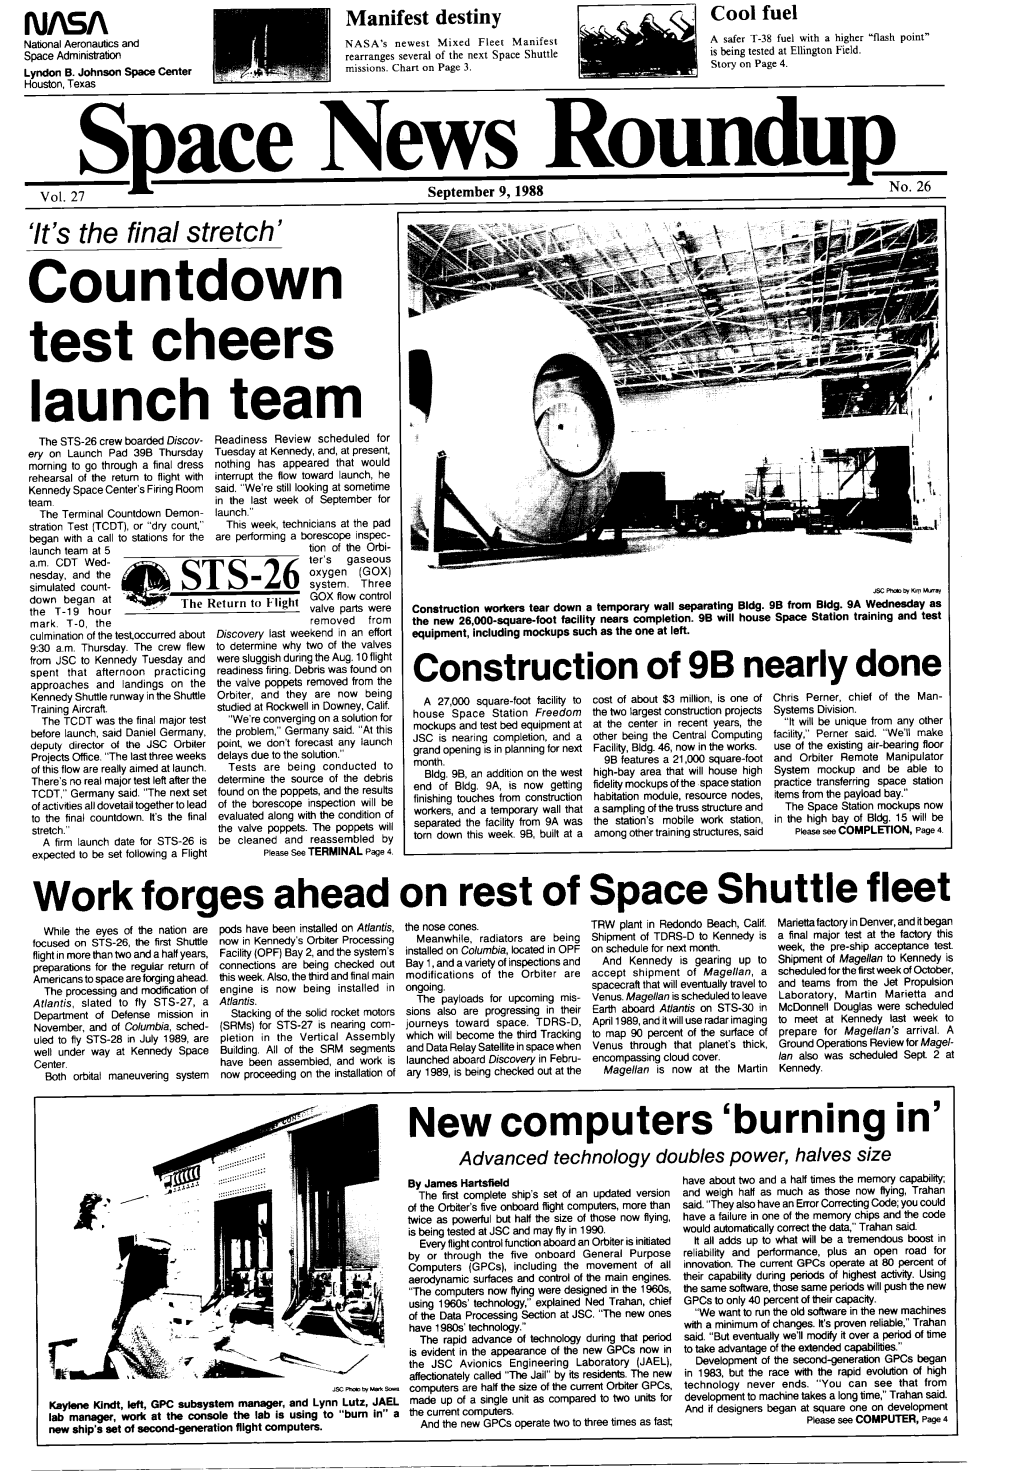 Countdown Test Cheers Launch Team